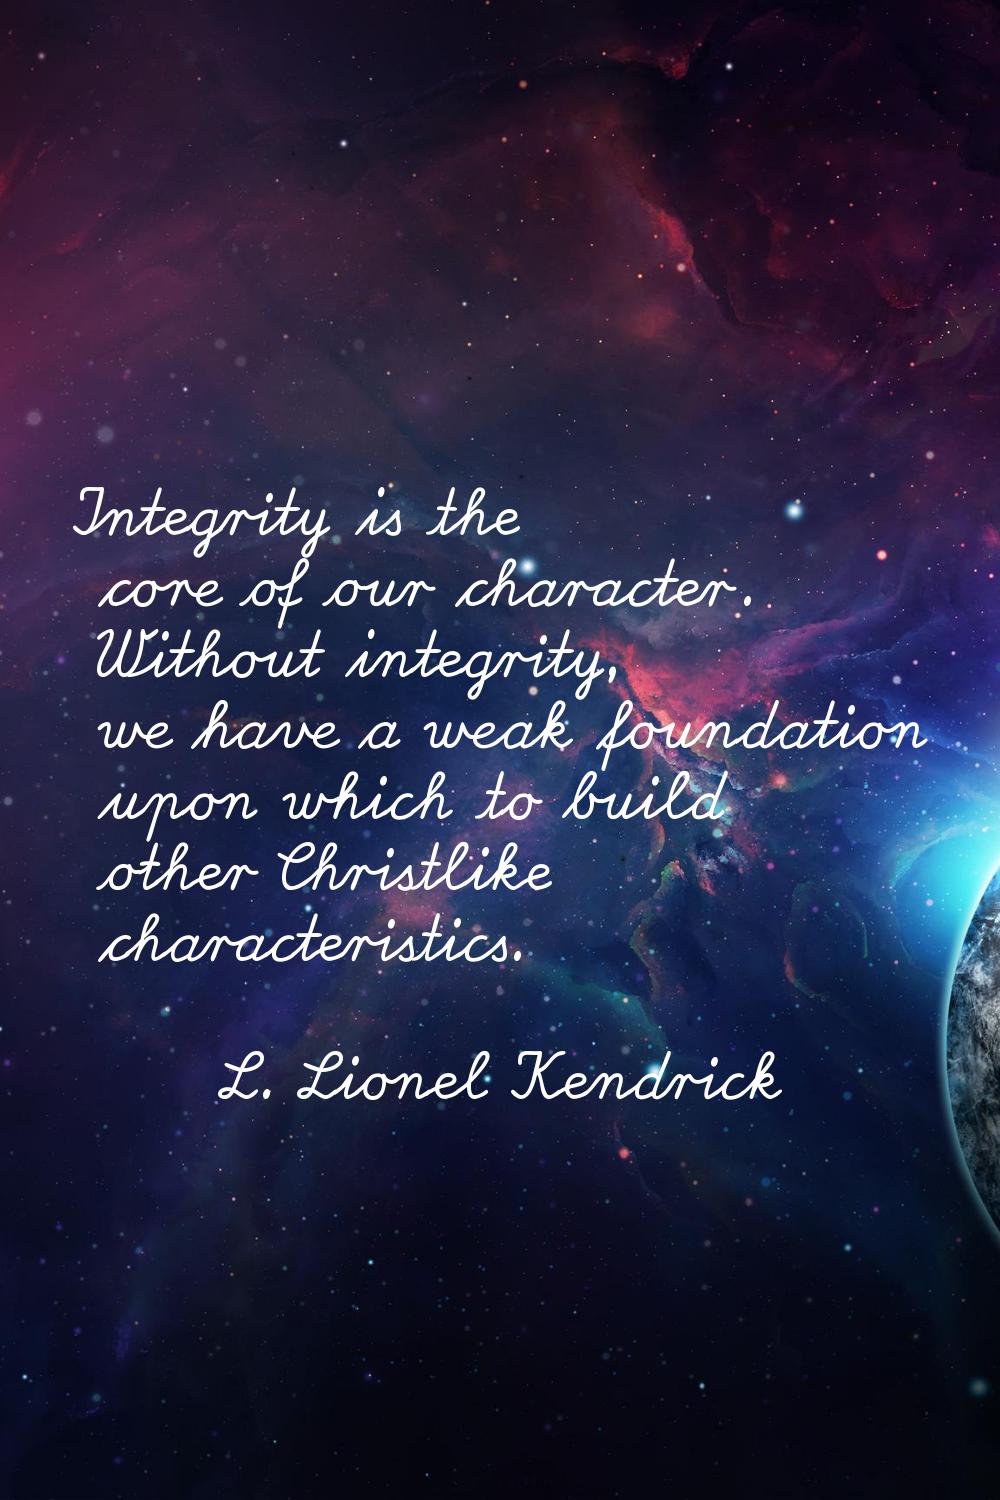 Integrity is the core of our character. Without integrity, we have a weak foundation upon which to 